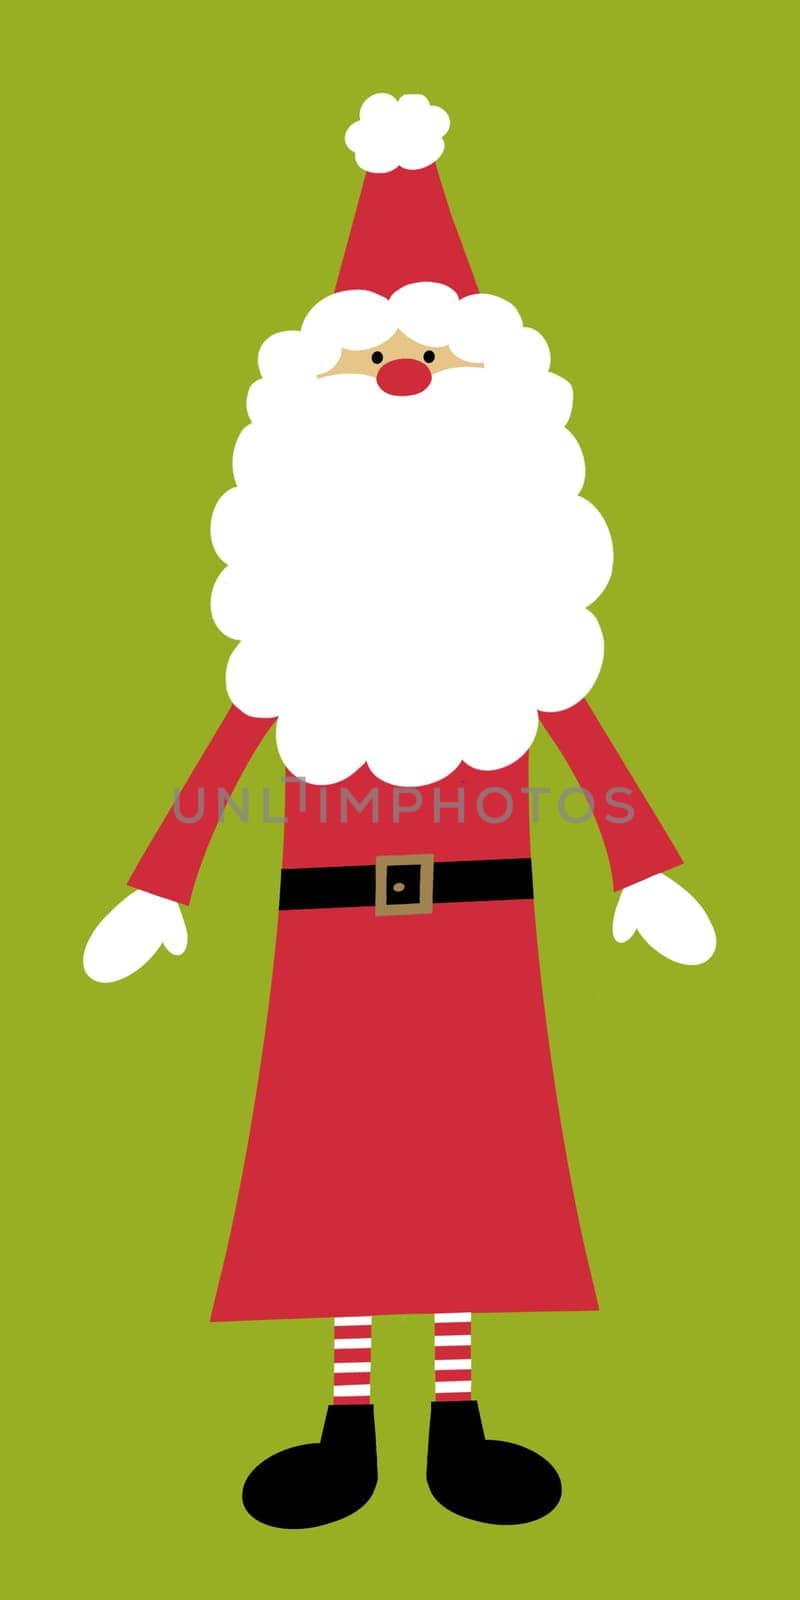 Illustration of a fun quirky Santa by RusticPuffin